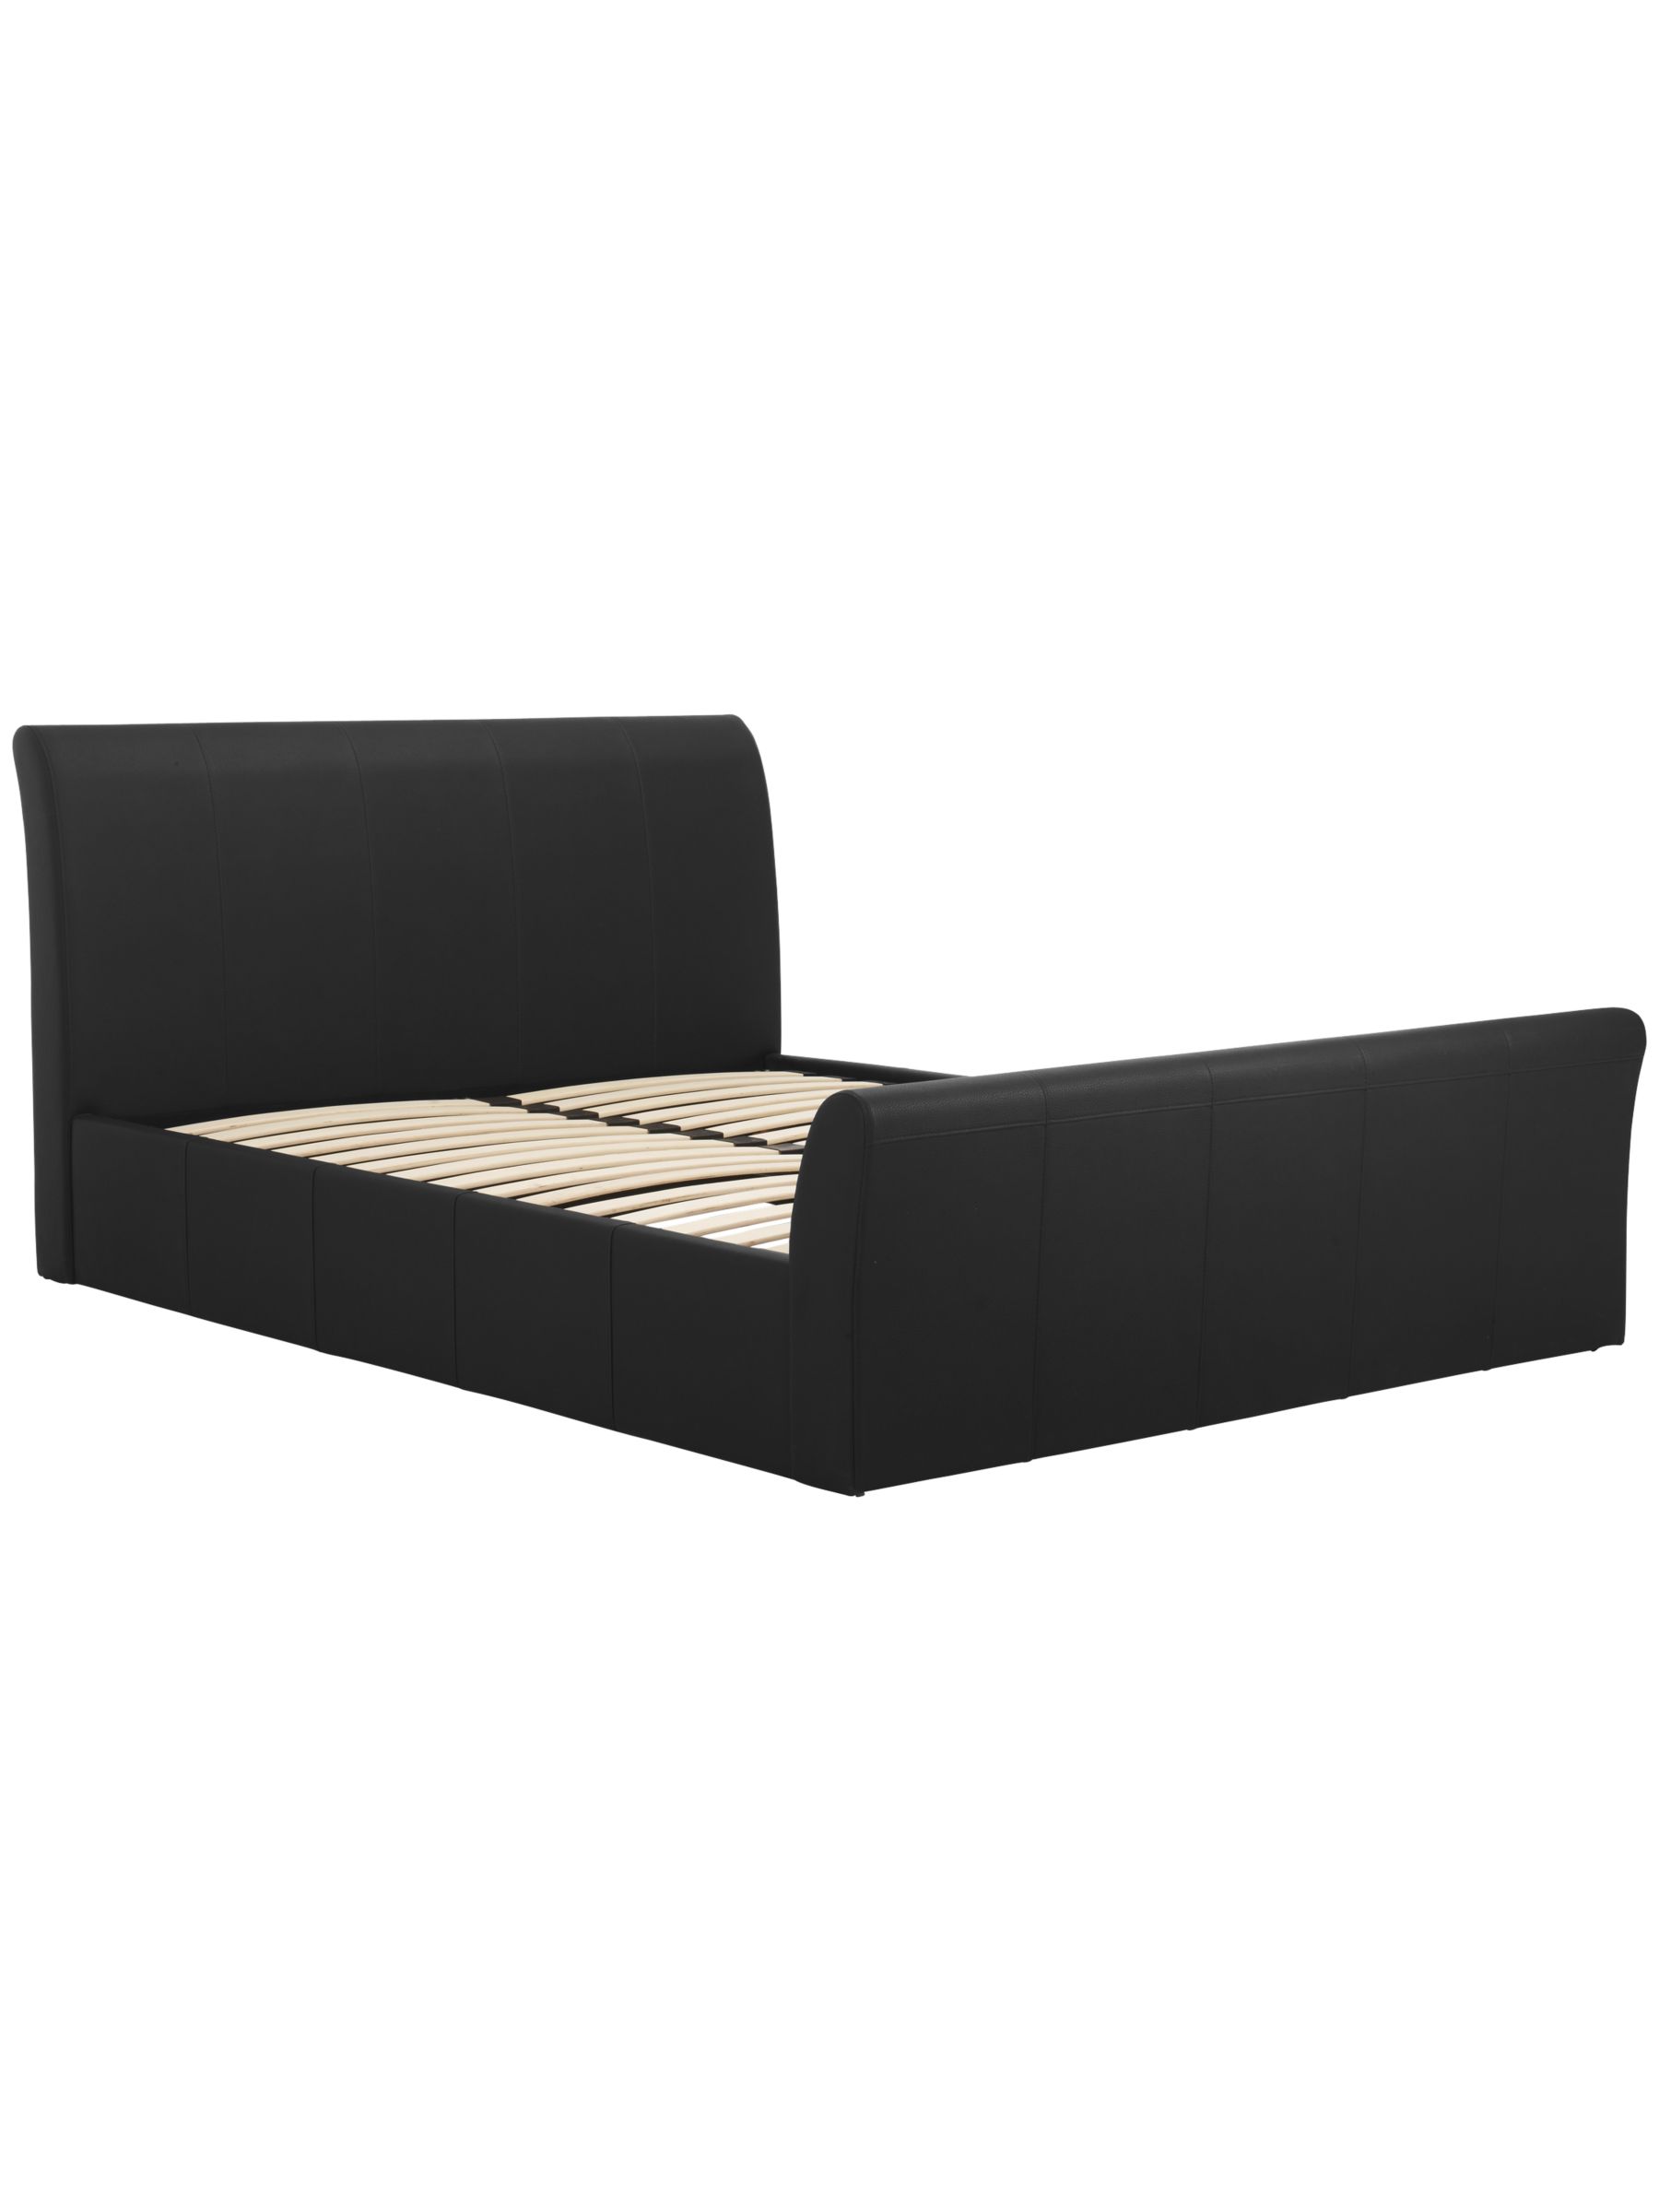 Chatham Bedstead, Black, Double